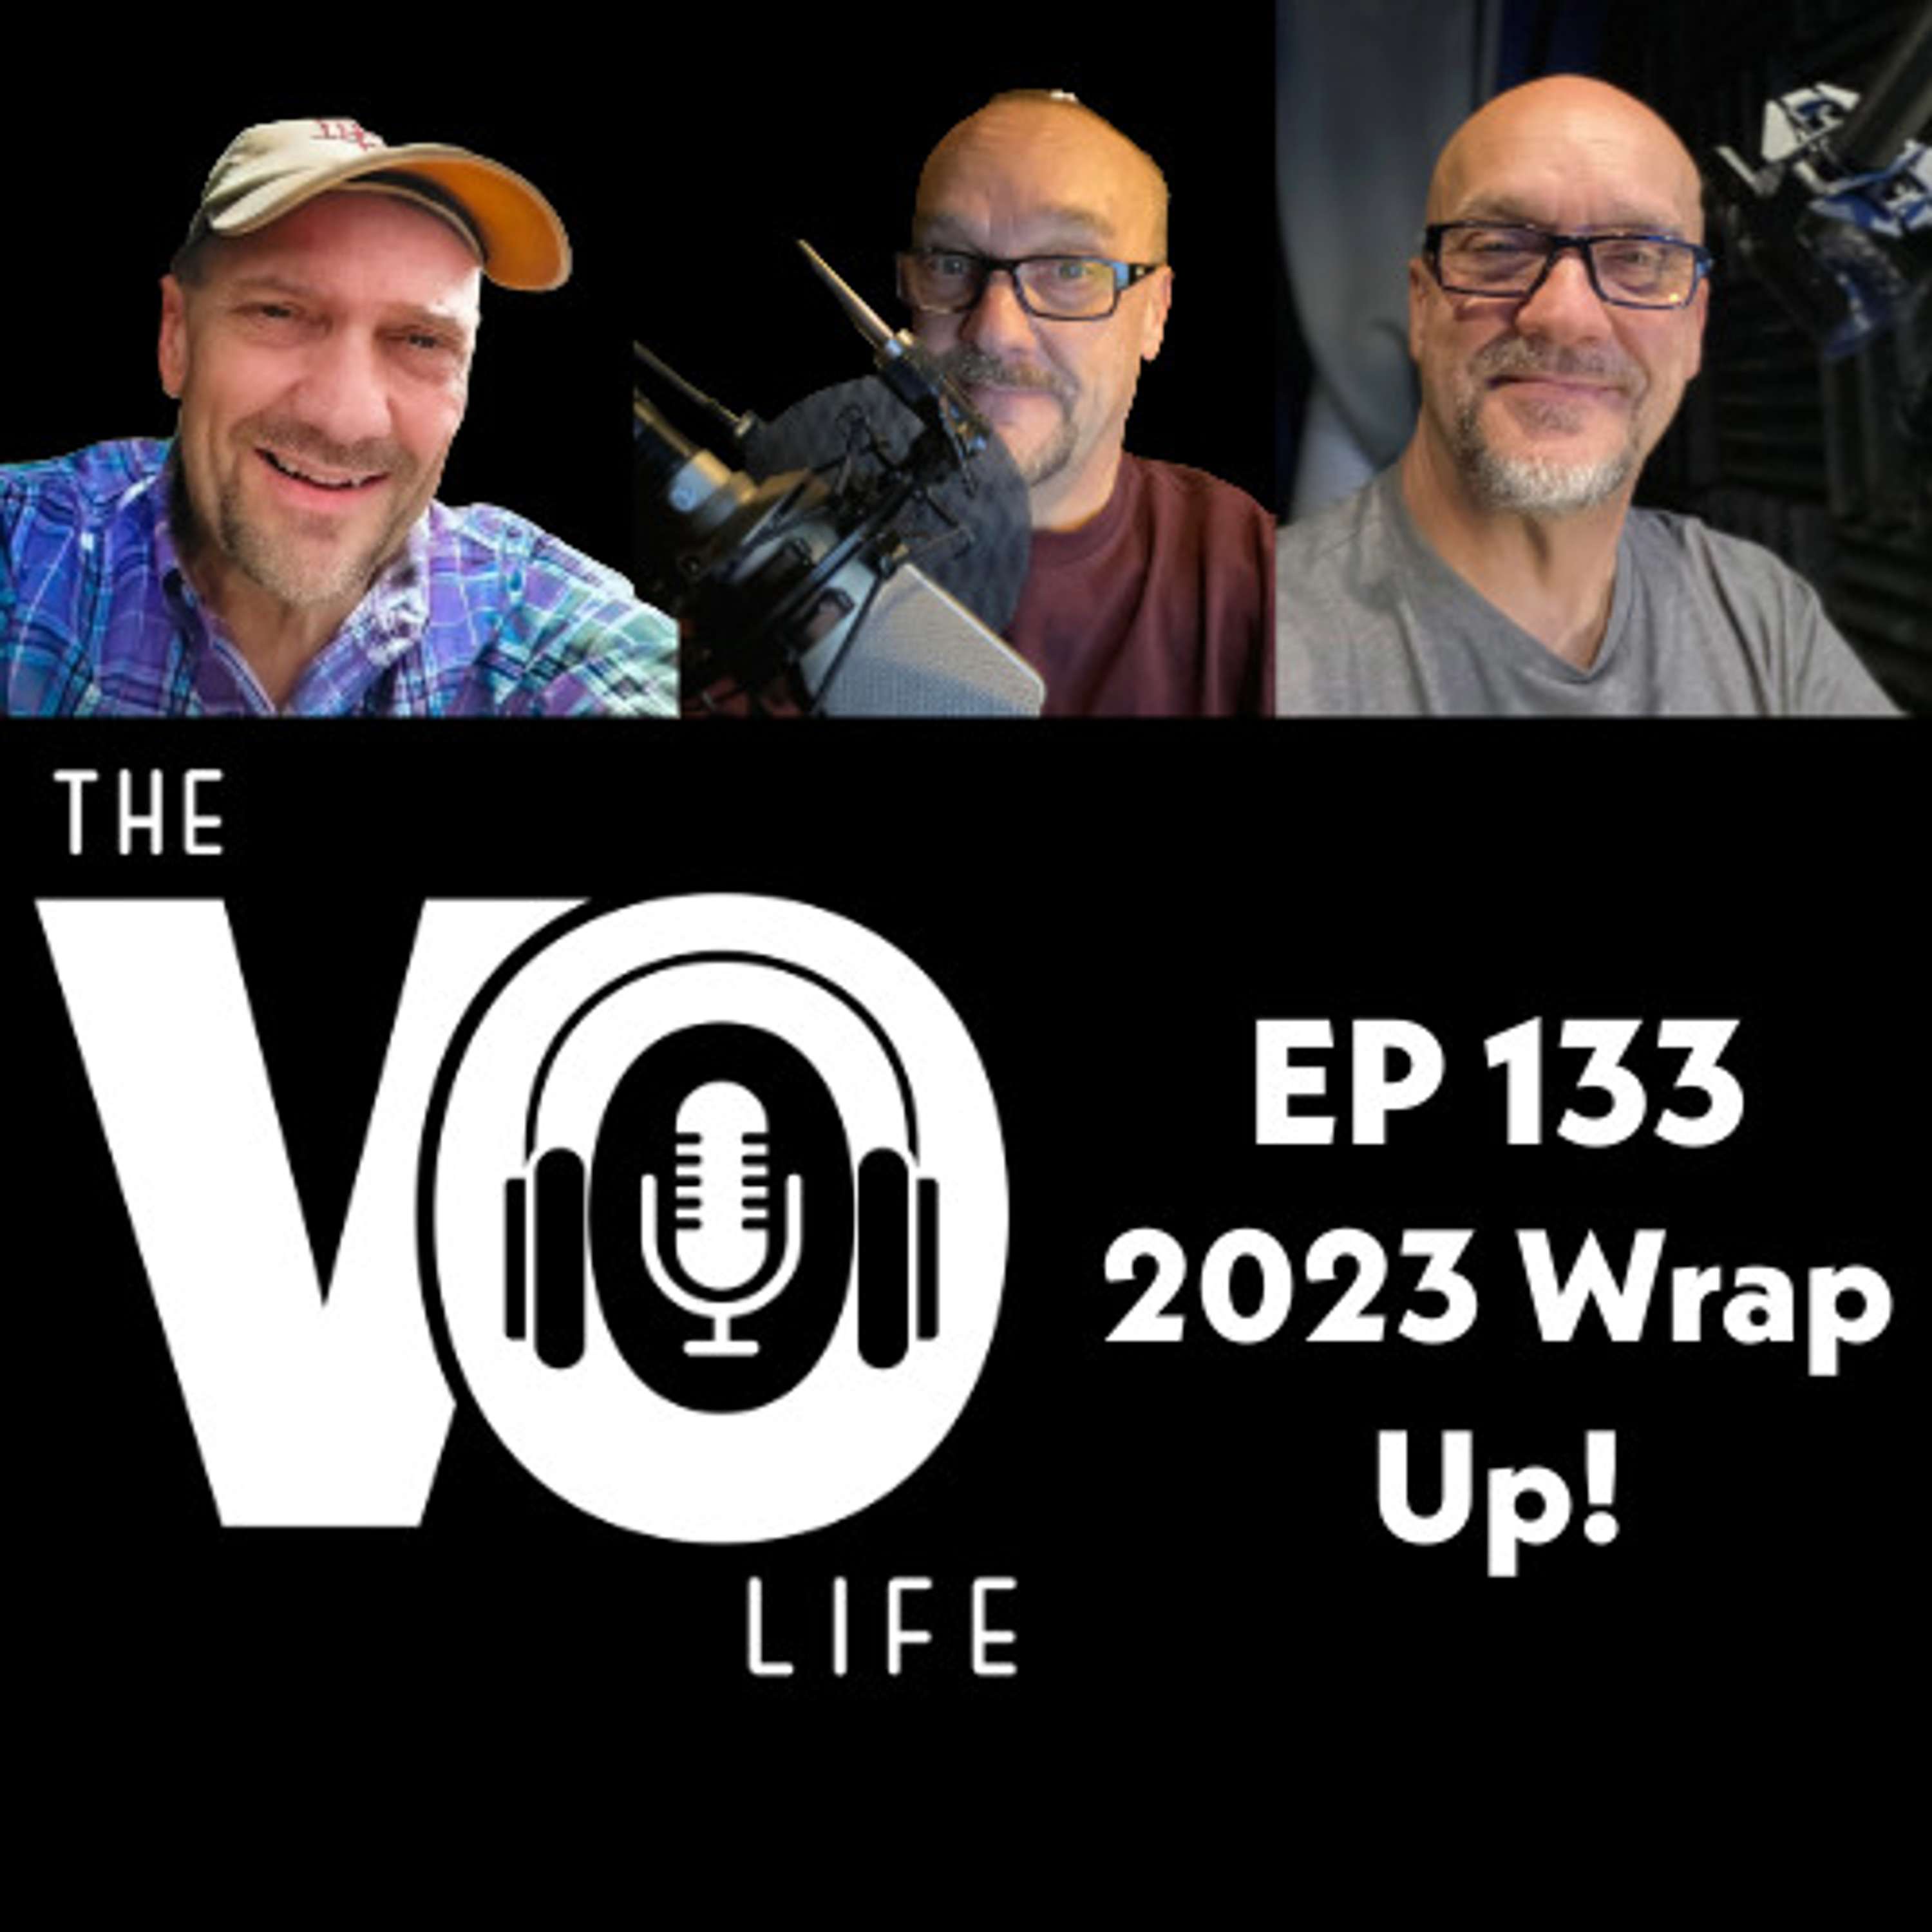 Ep 133 - 2023 Wrap Up